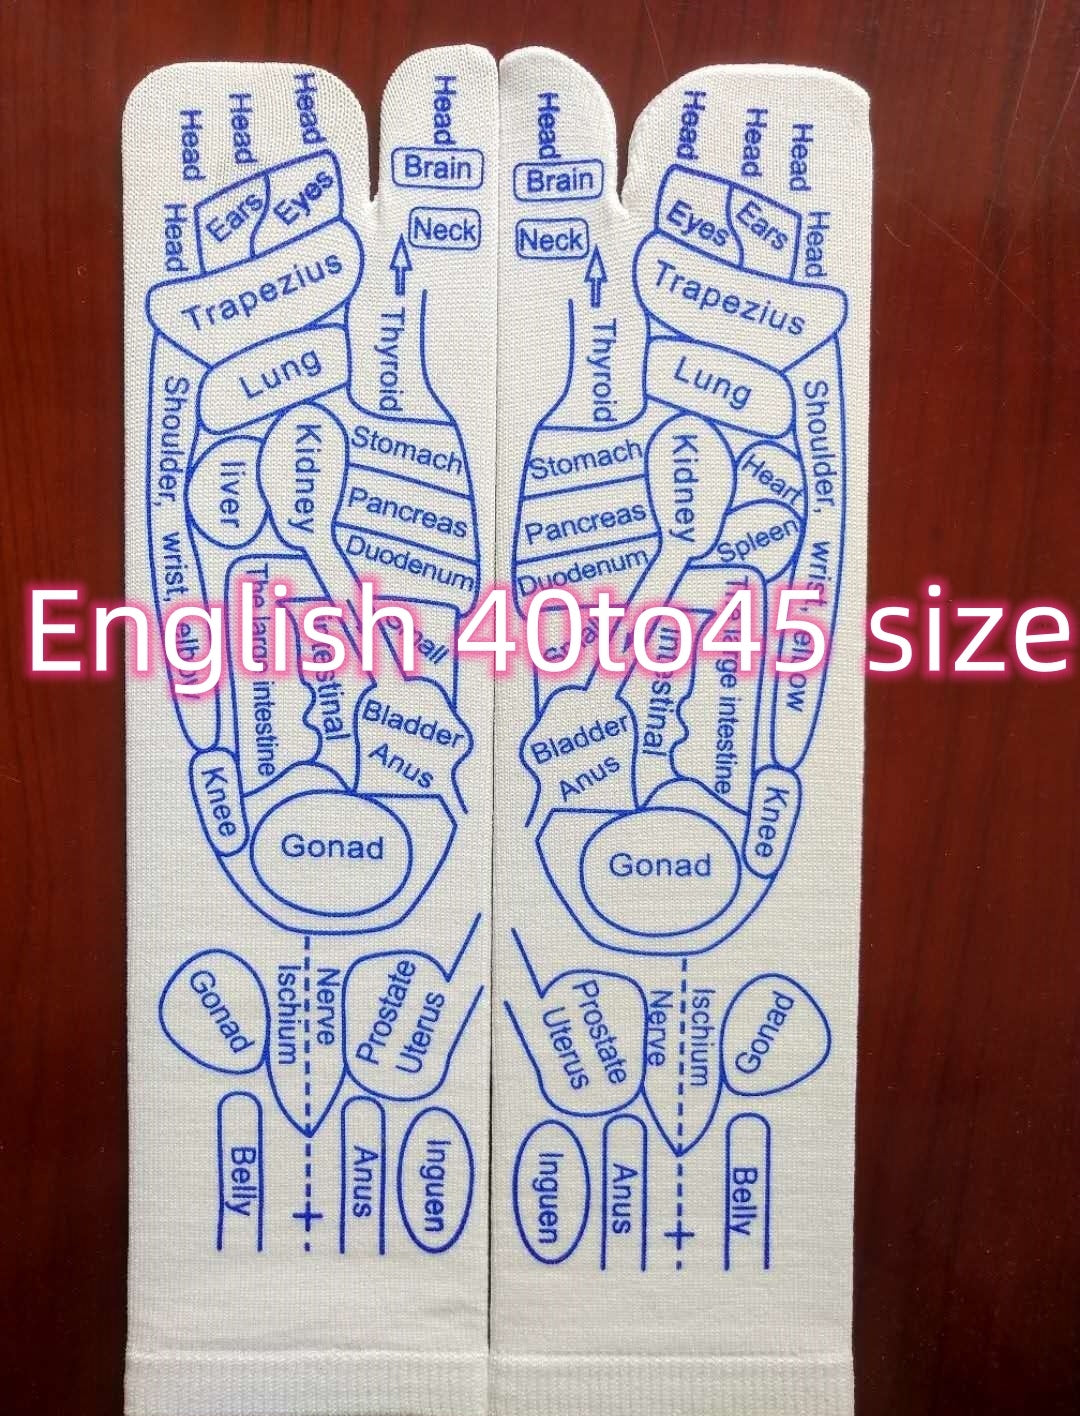 English 40to45 size